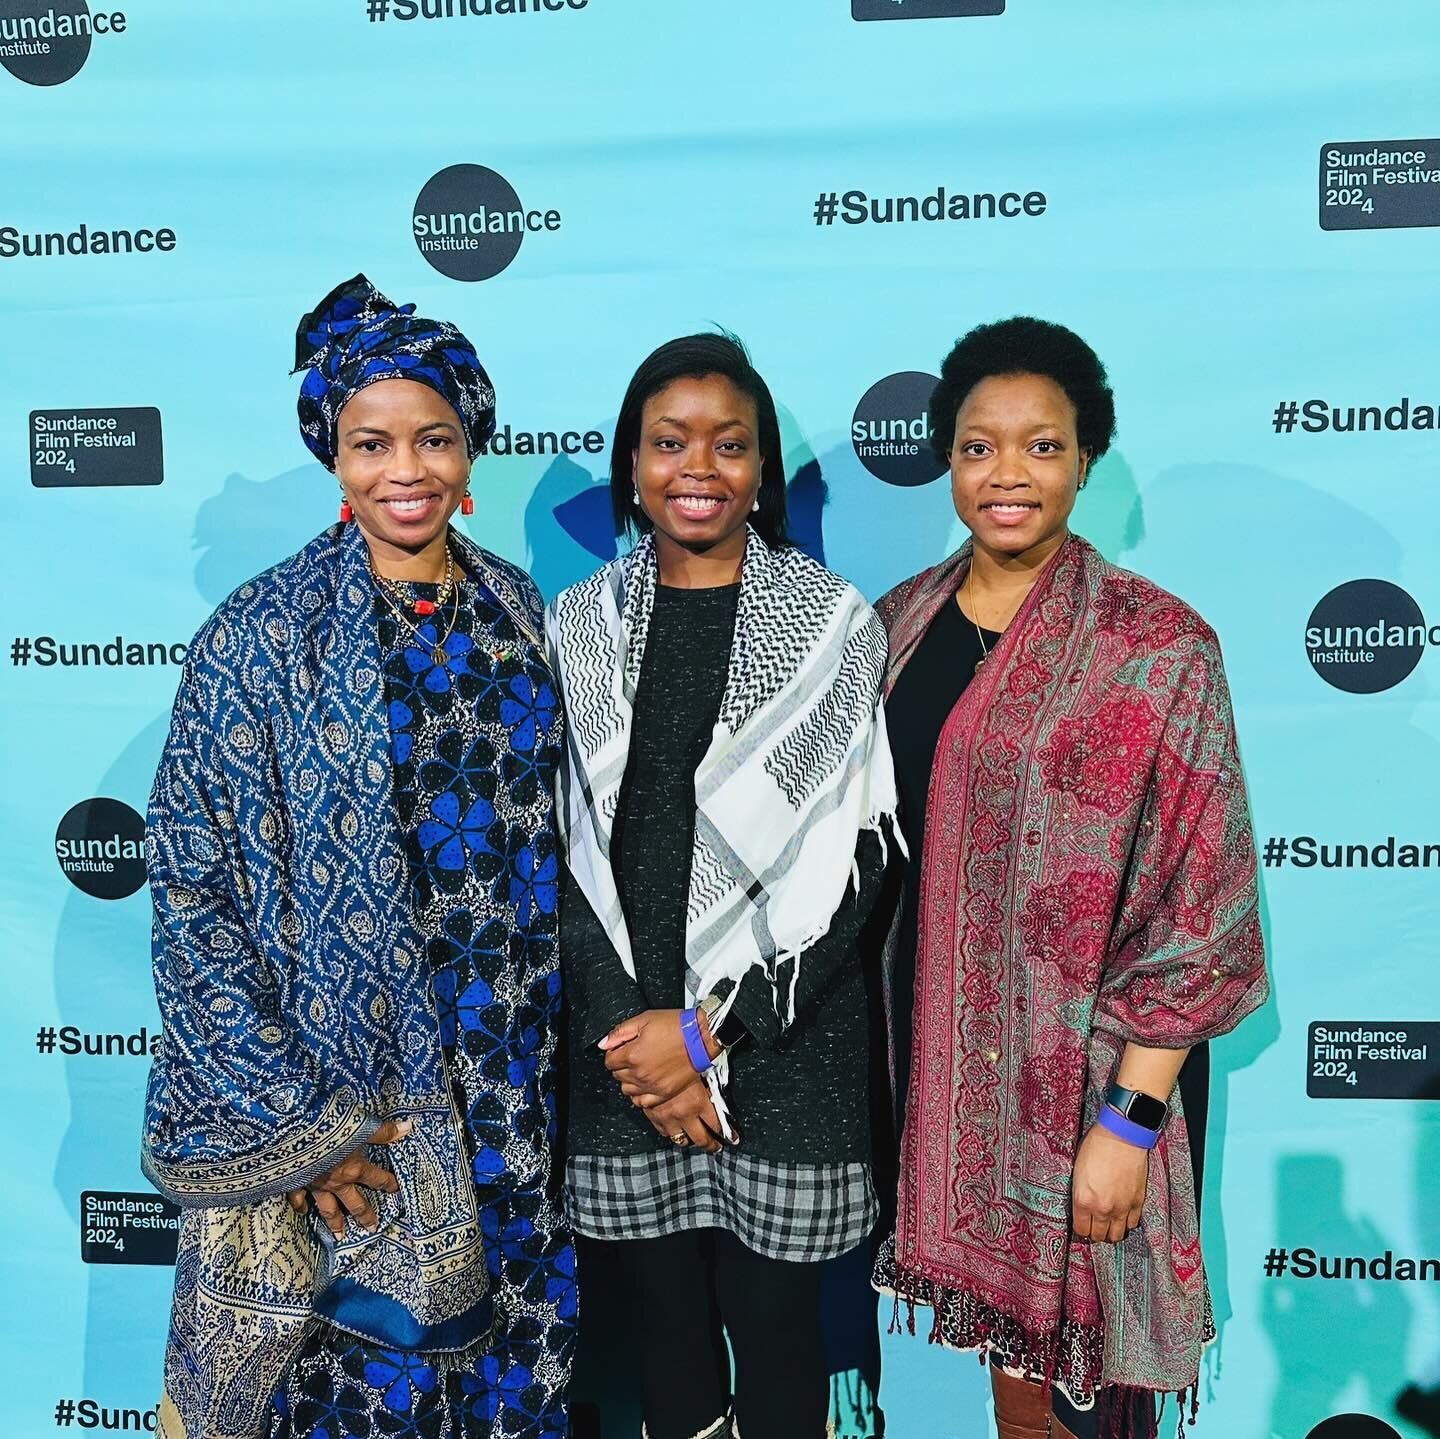 Sundance 2024 photo dump! So grateful for the Disney X Sundance Artist Fellowship for providing the opportunity to attend my first Sundance ever 🙏🏾 And best of all, I got to bring my family along as well 😄

1: The fam &amp; I at the @mpachollywood